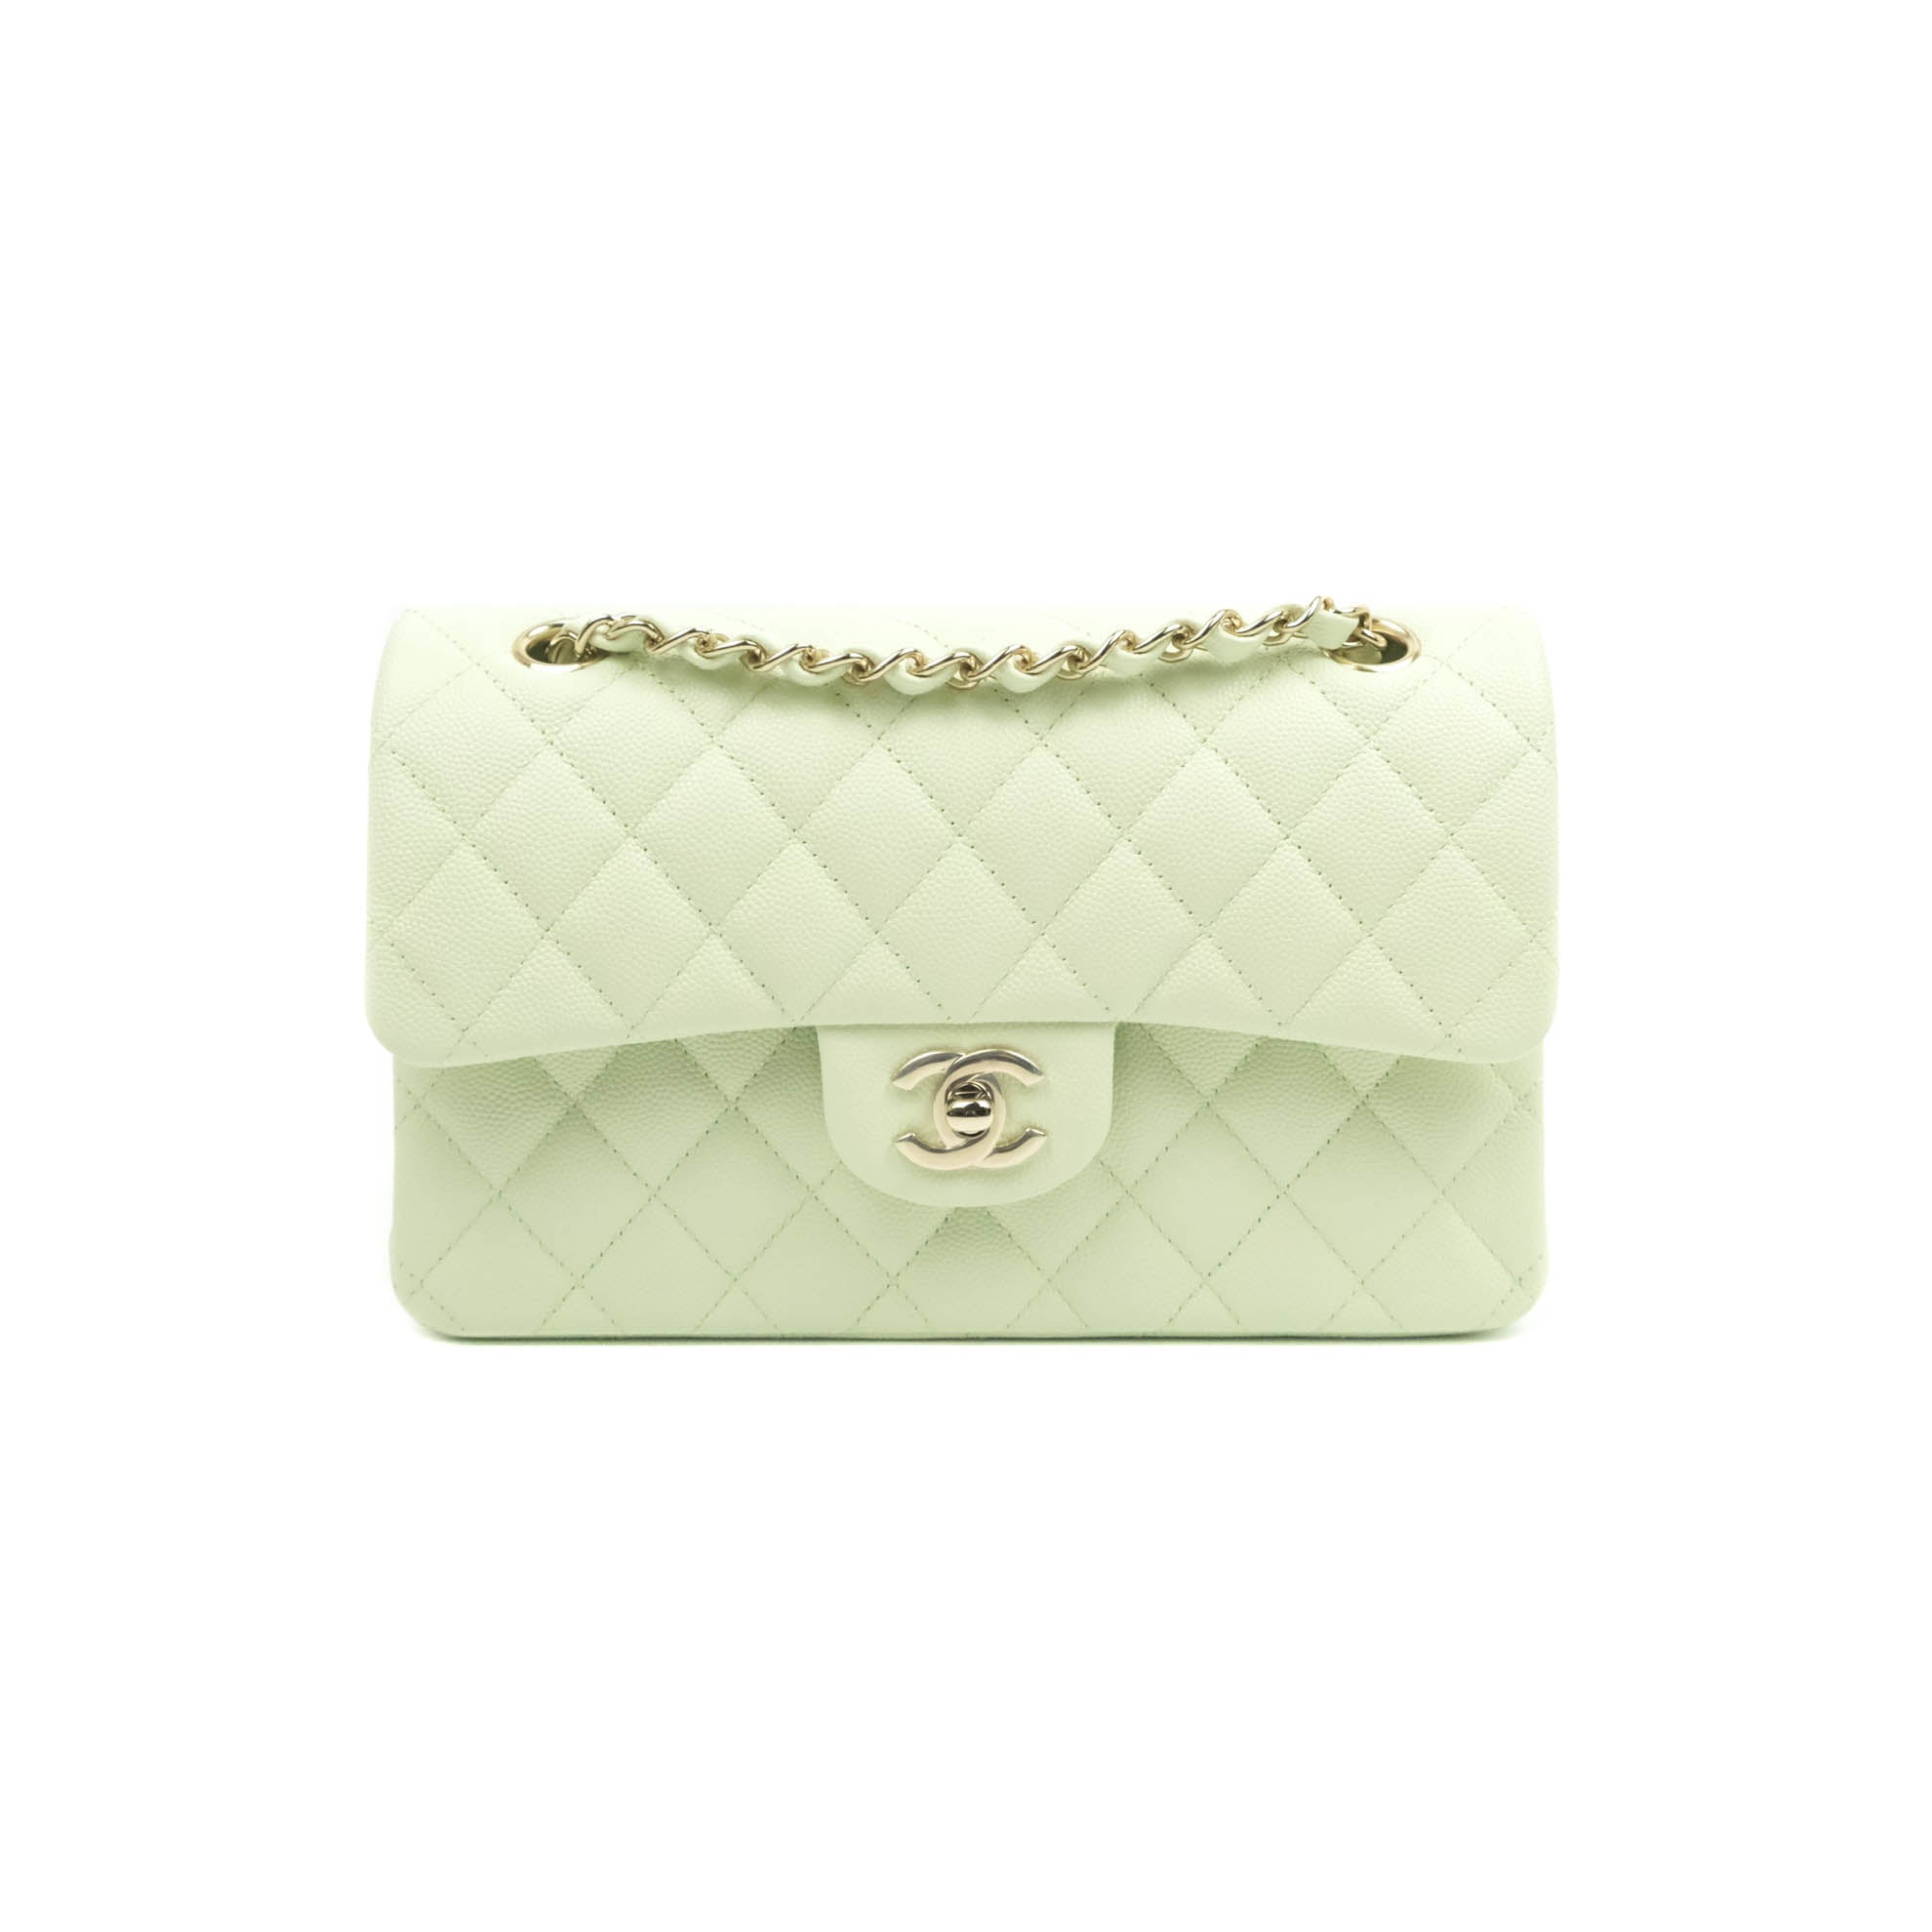 Chanel Quilted Caviar Mint Passport Holder Gold Hardware – Coco Approved  Studio